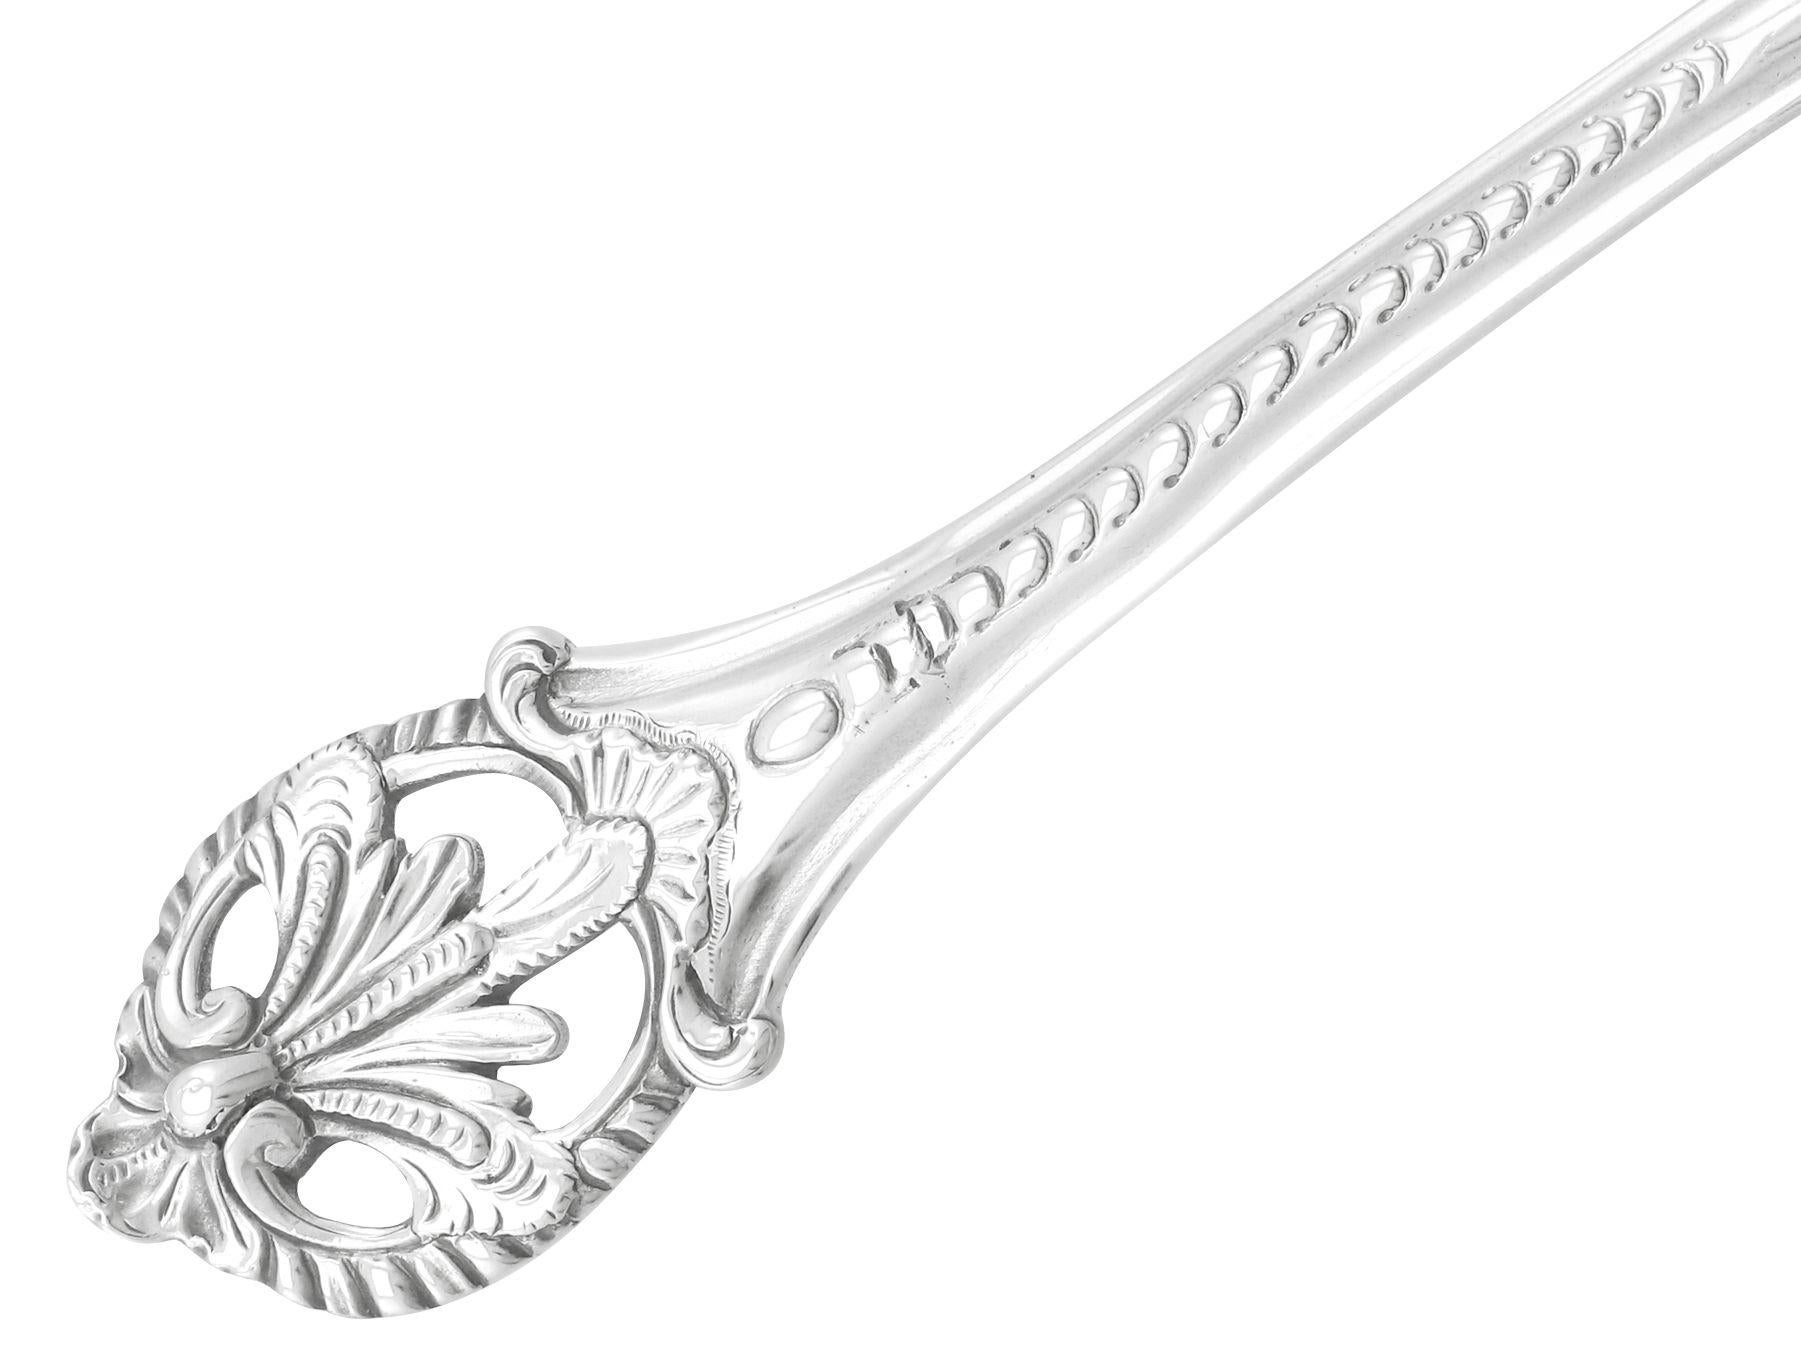 George III Georgian Sterling Silver Fish Slice Pudding Trowel For Sale